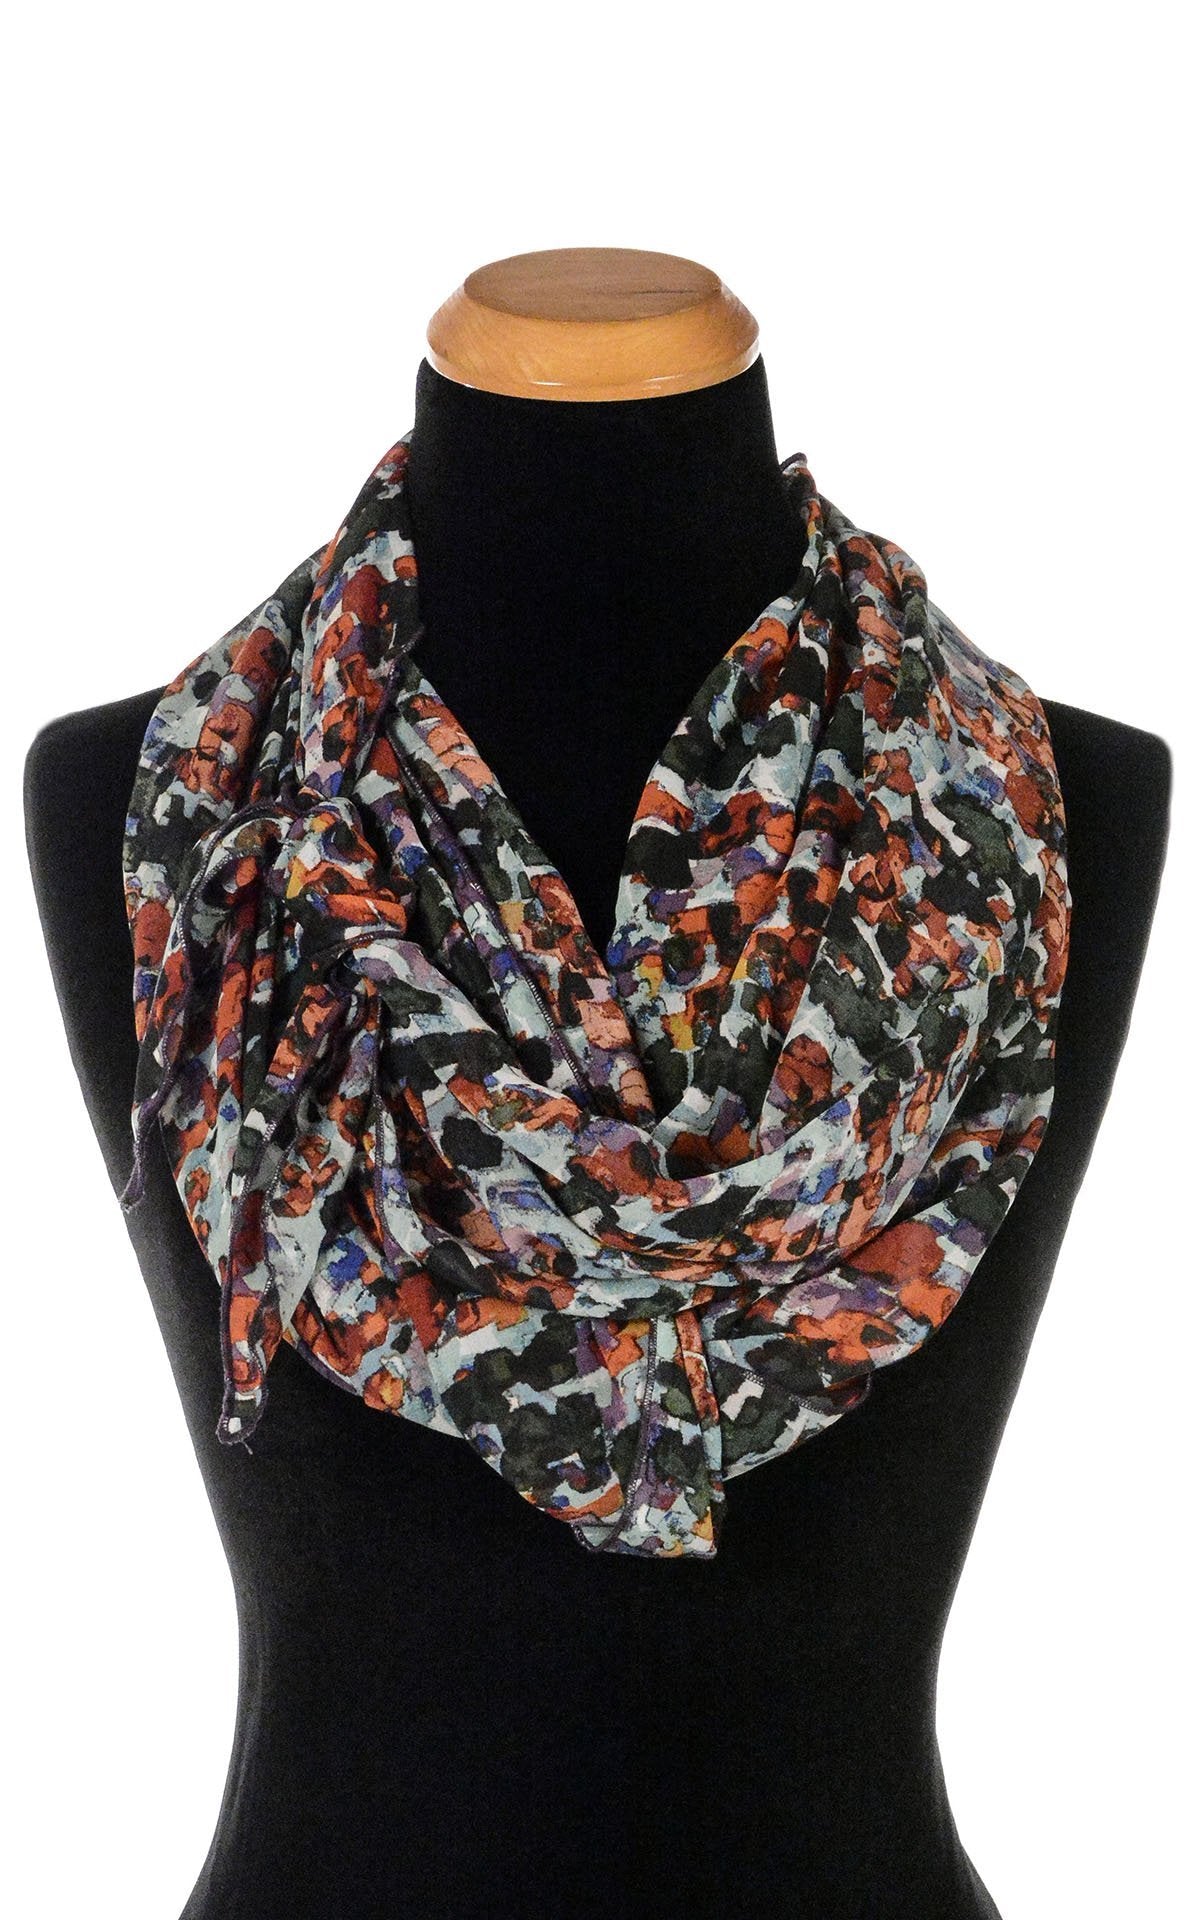 Women’s Large Handkerchief Scarf, Wrap on Mannequin shown tied | Shown in Purple Impression abstract Chiffon print. Blacks, reds creams, green, rust| Handmade in Seattle WA | Pandemonium Millinery